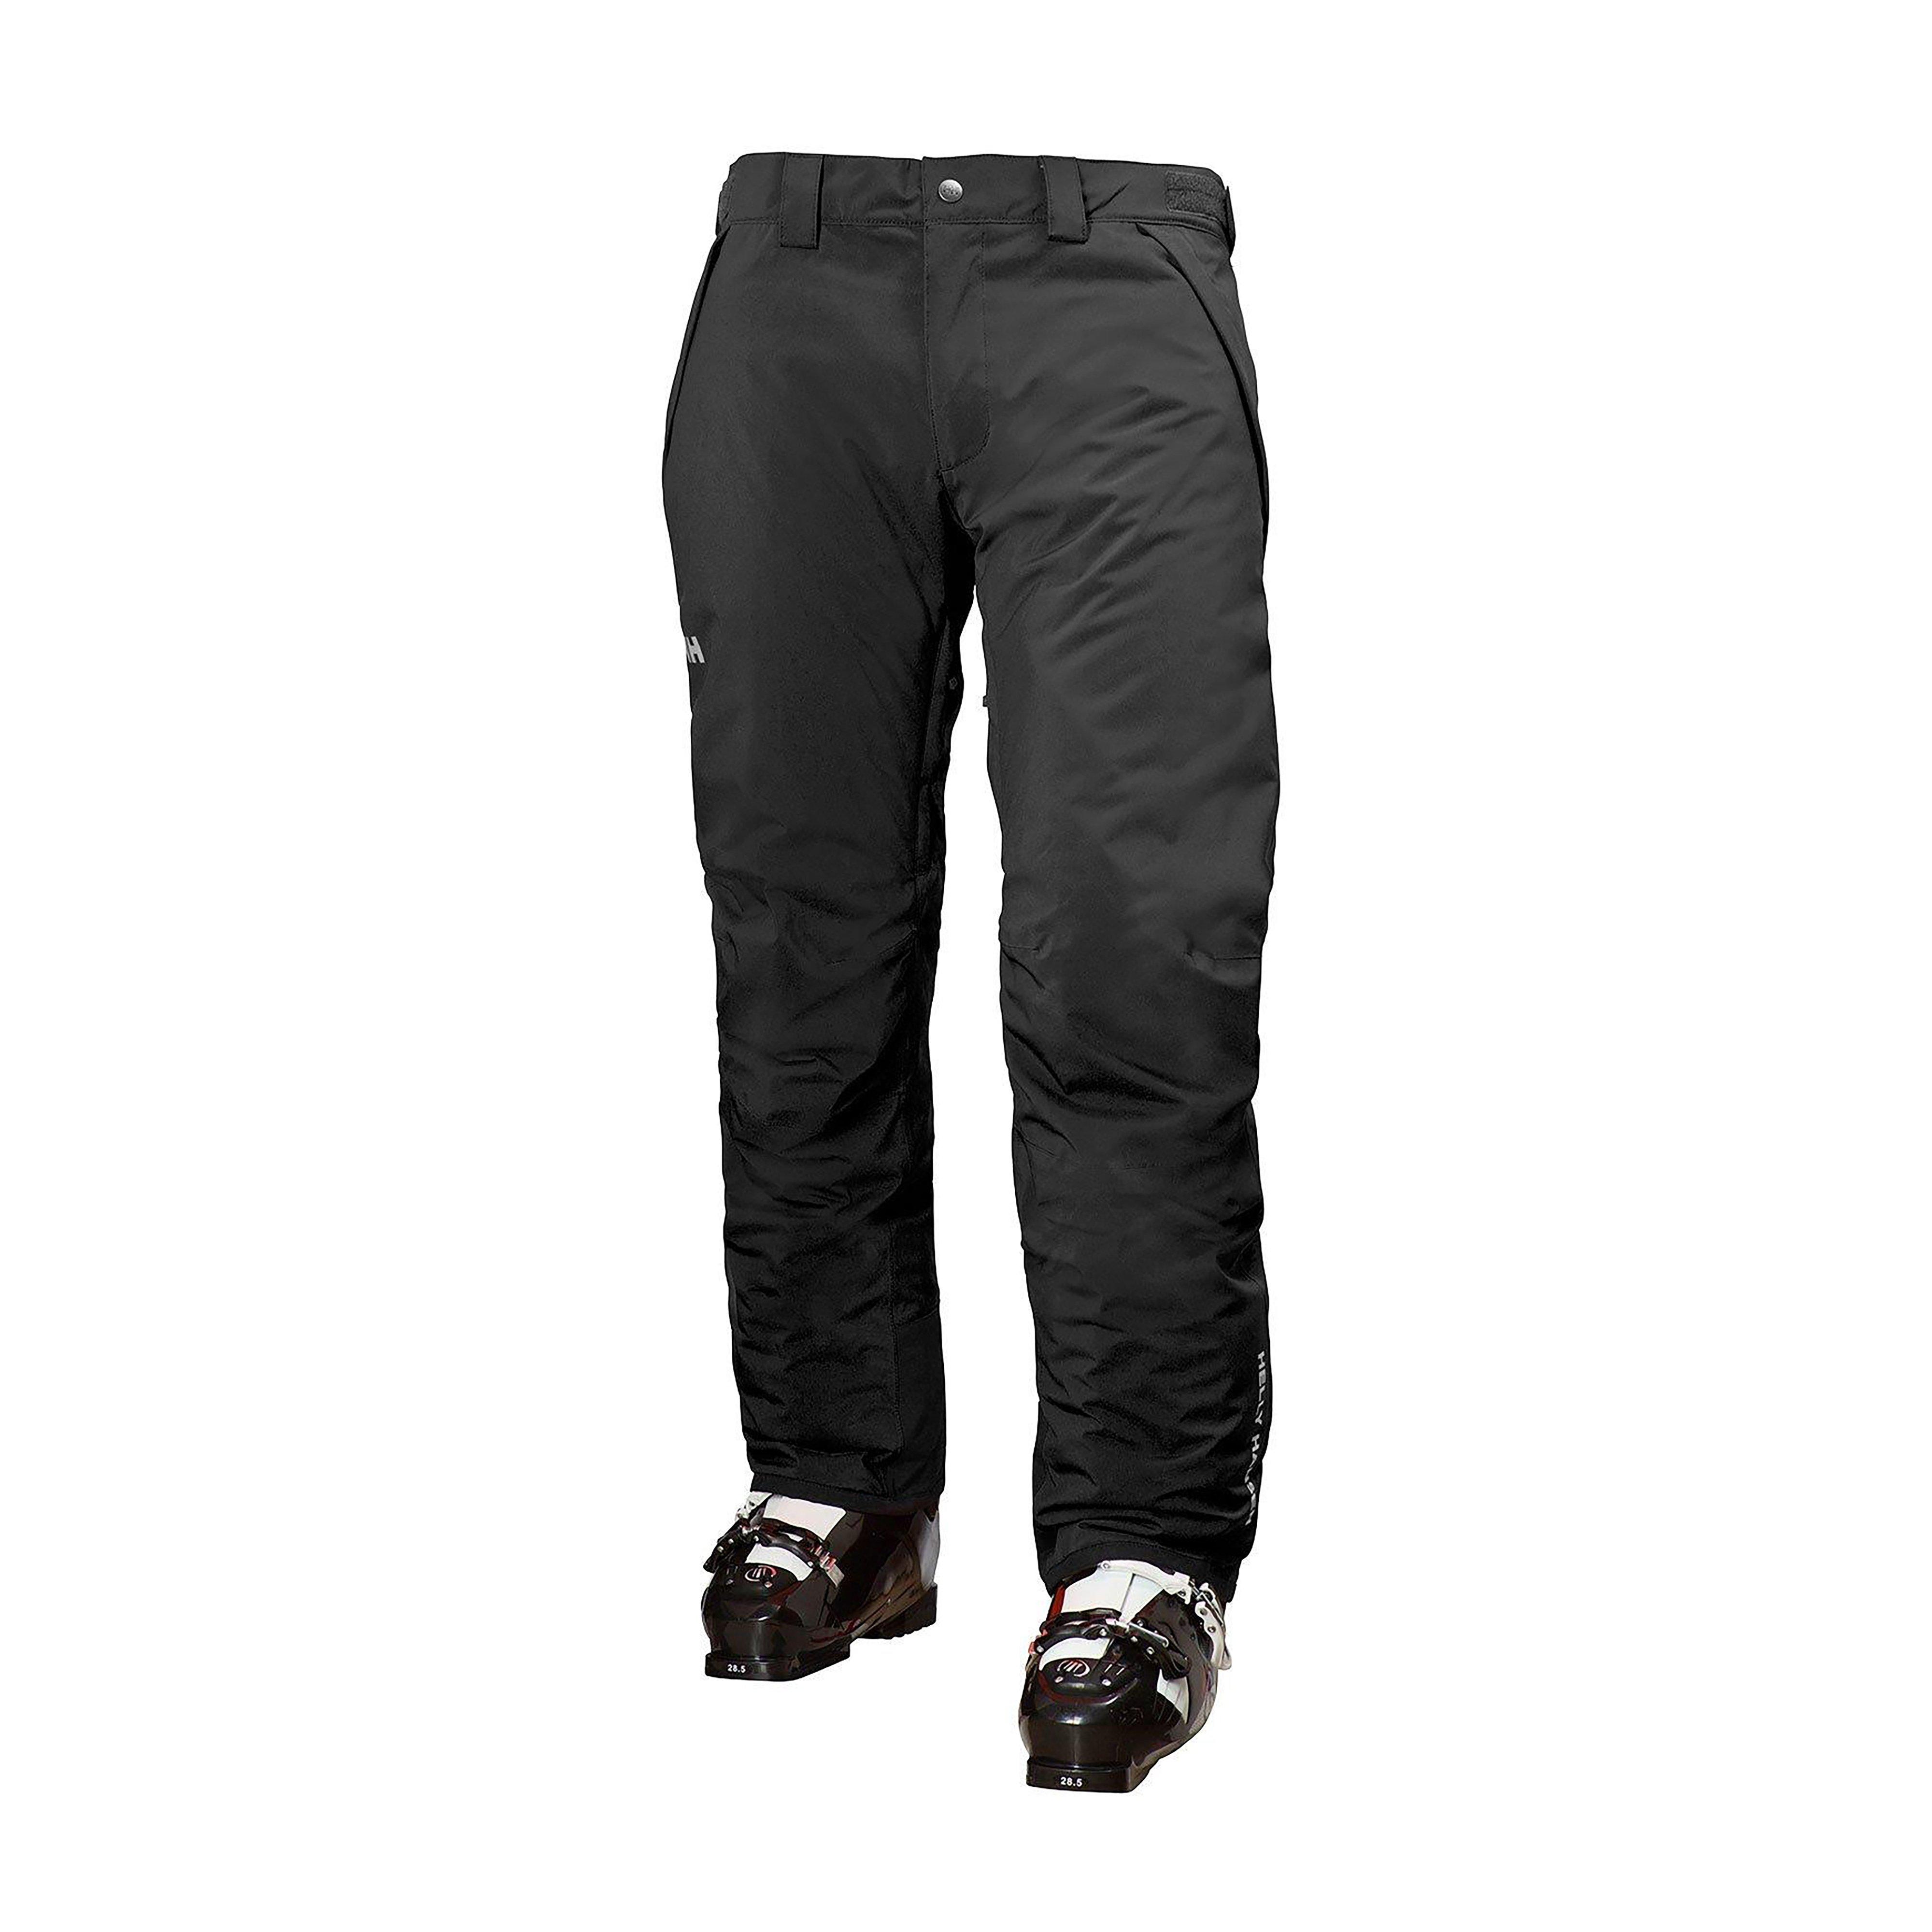 Helly Hansen Men's Velocity Insulated Pant Review